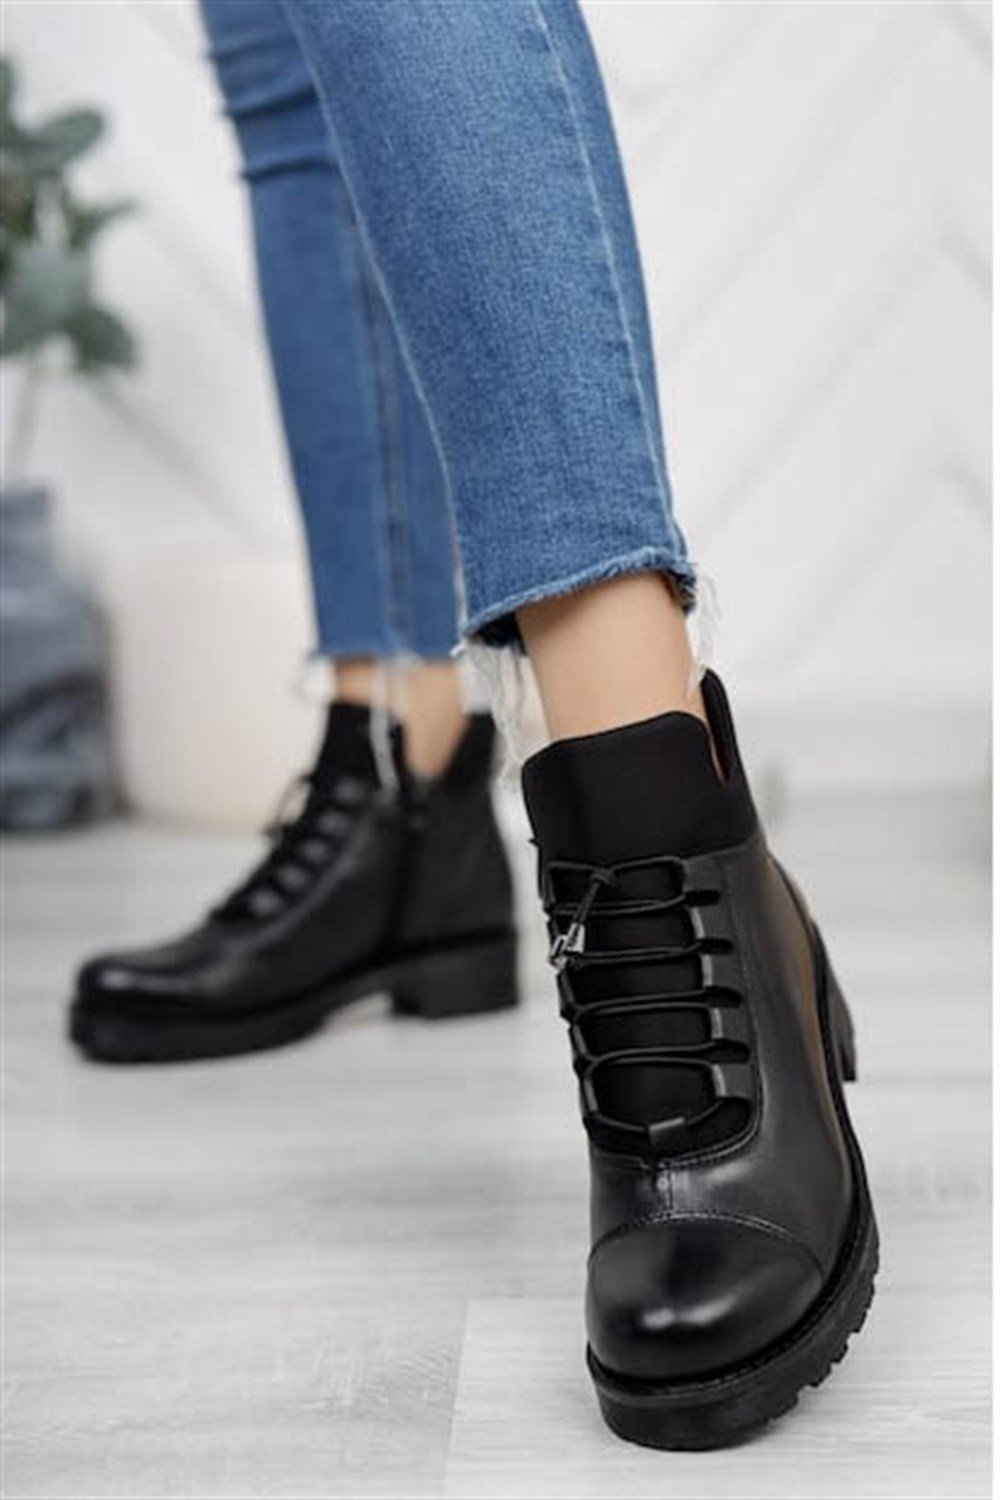 Women's Leather Lace Up Zipper Boots